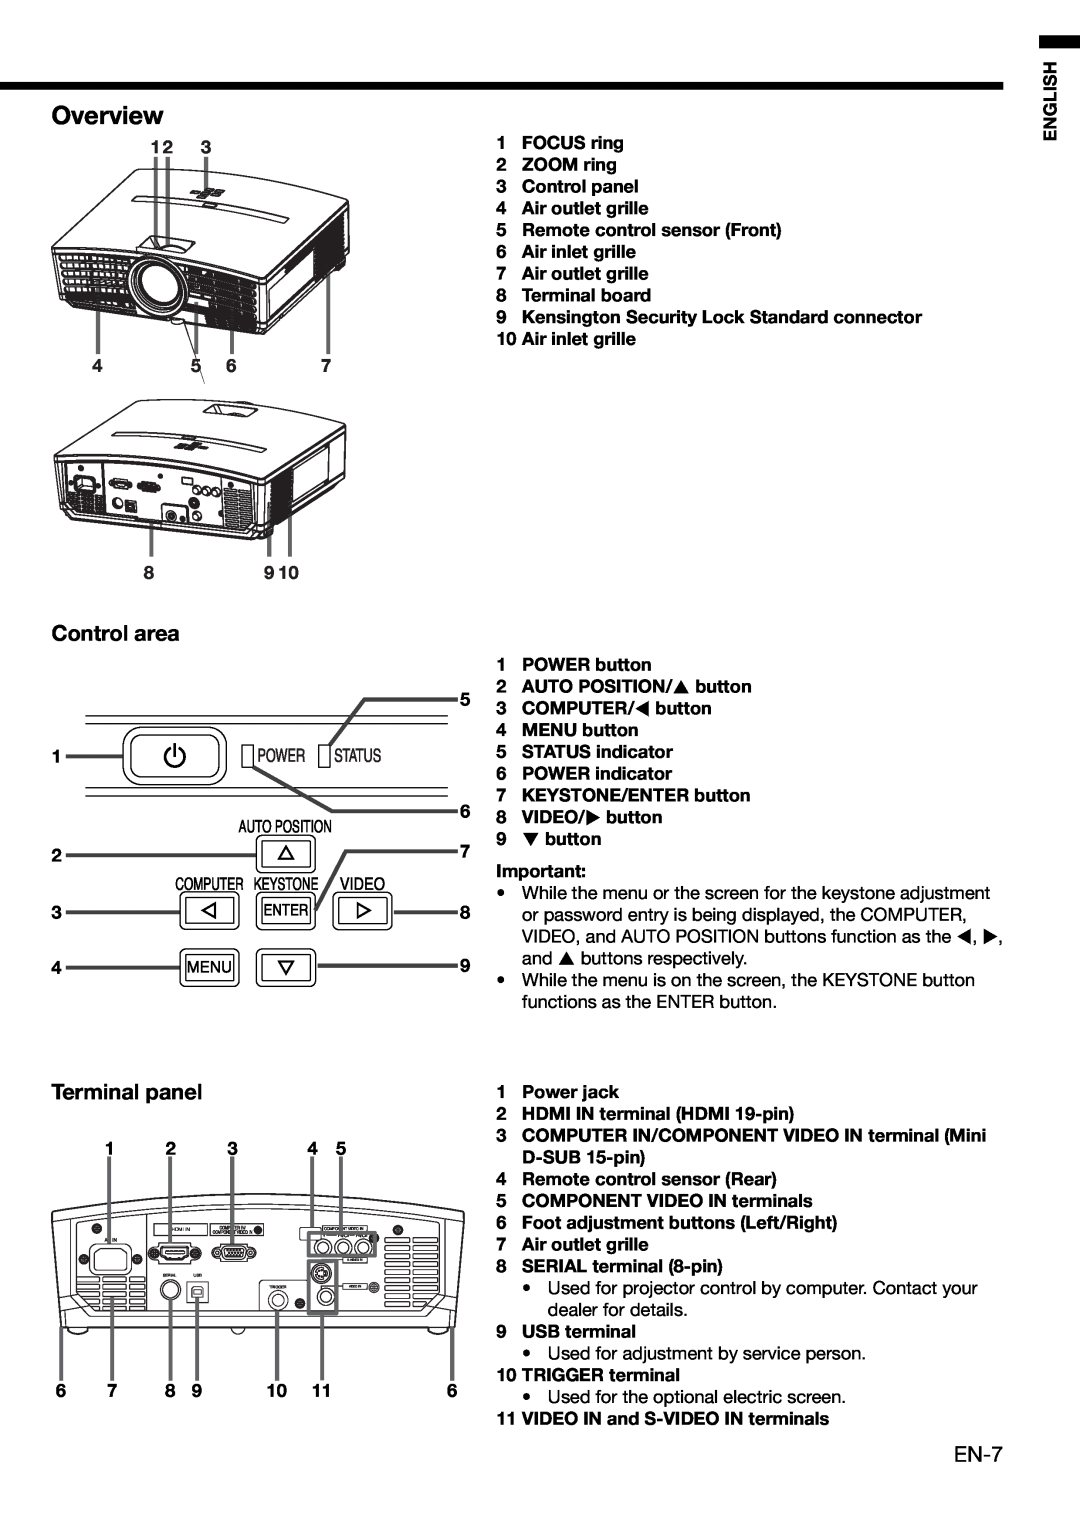 Mitsubishi HC1100 Overview, Control area, Terminal panel, FOCUS ring 2 ZOOM ring 3 Control panel 4 Air outlet grille 